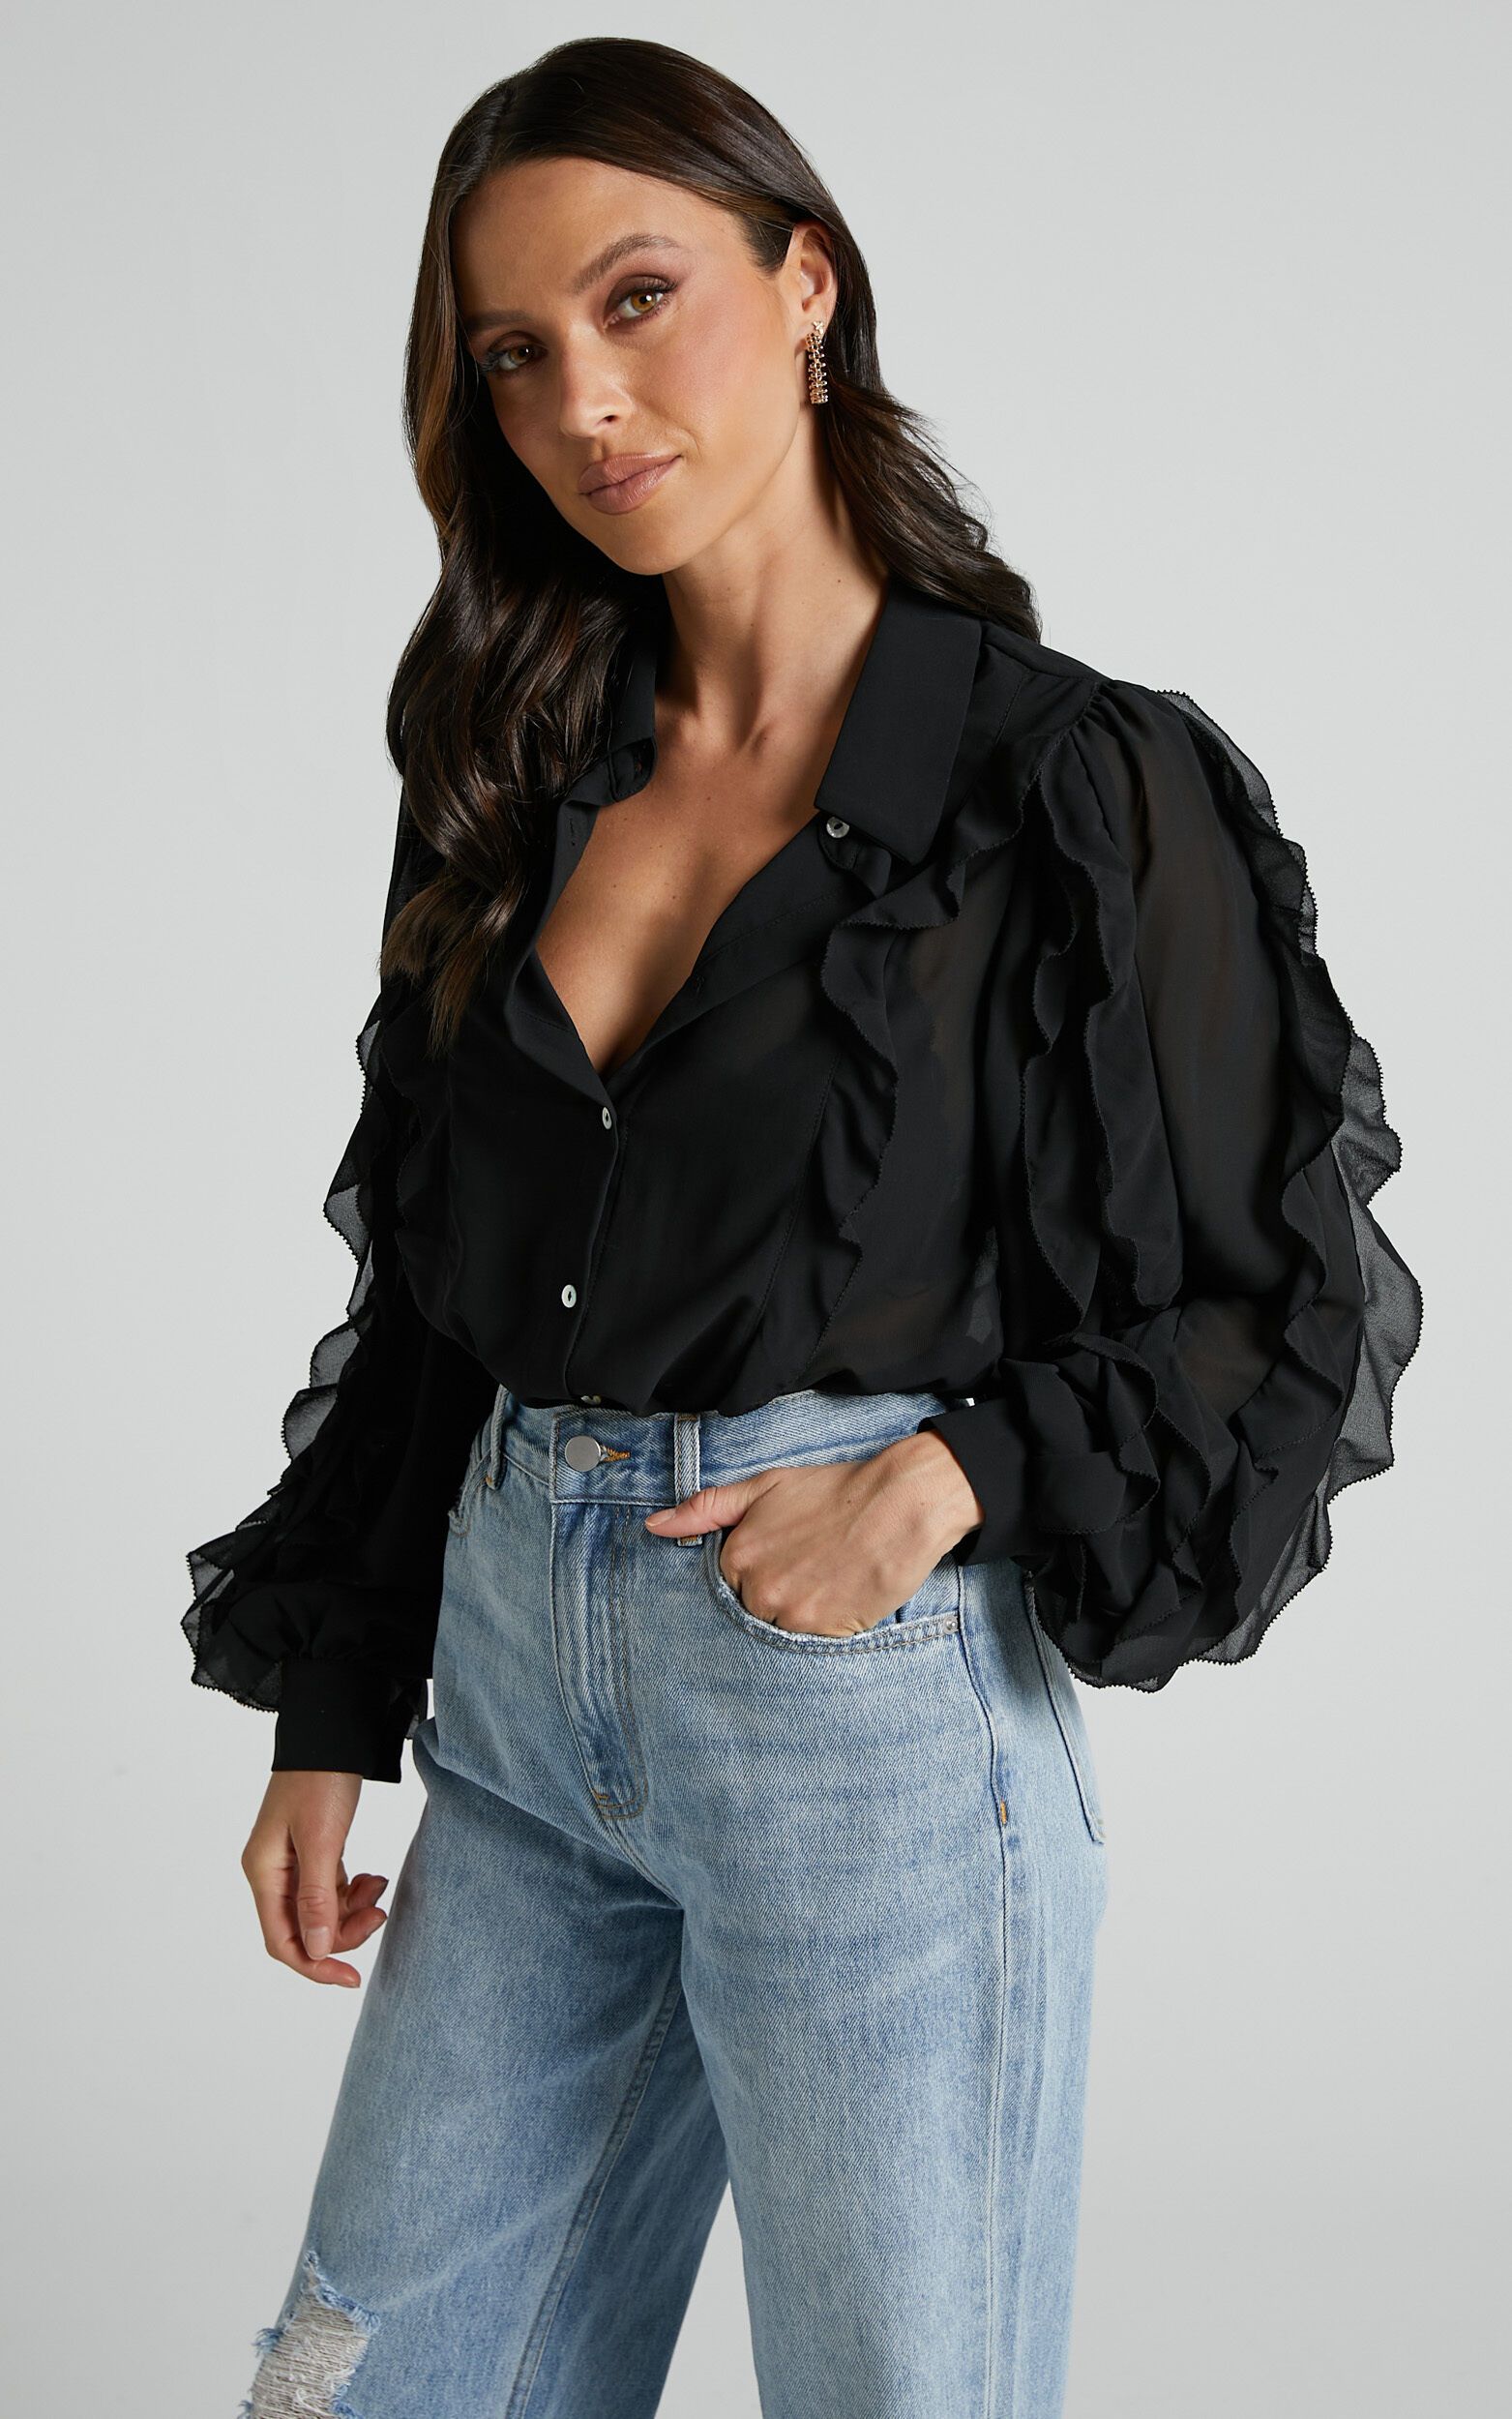 Miliano Top - Long Sleeve Frill Detail Button Through Blouse in Black - 04, BLK1